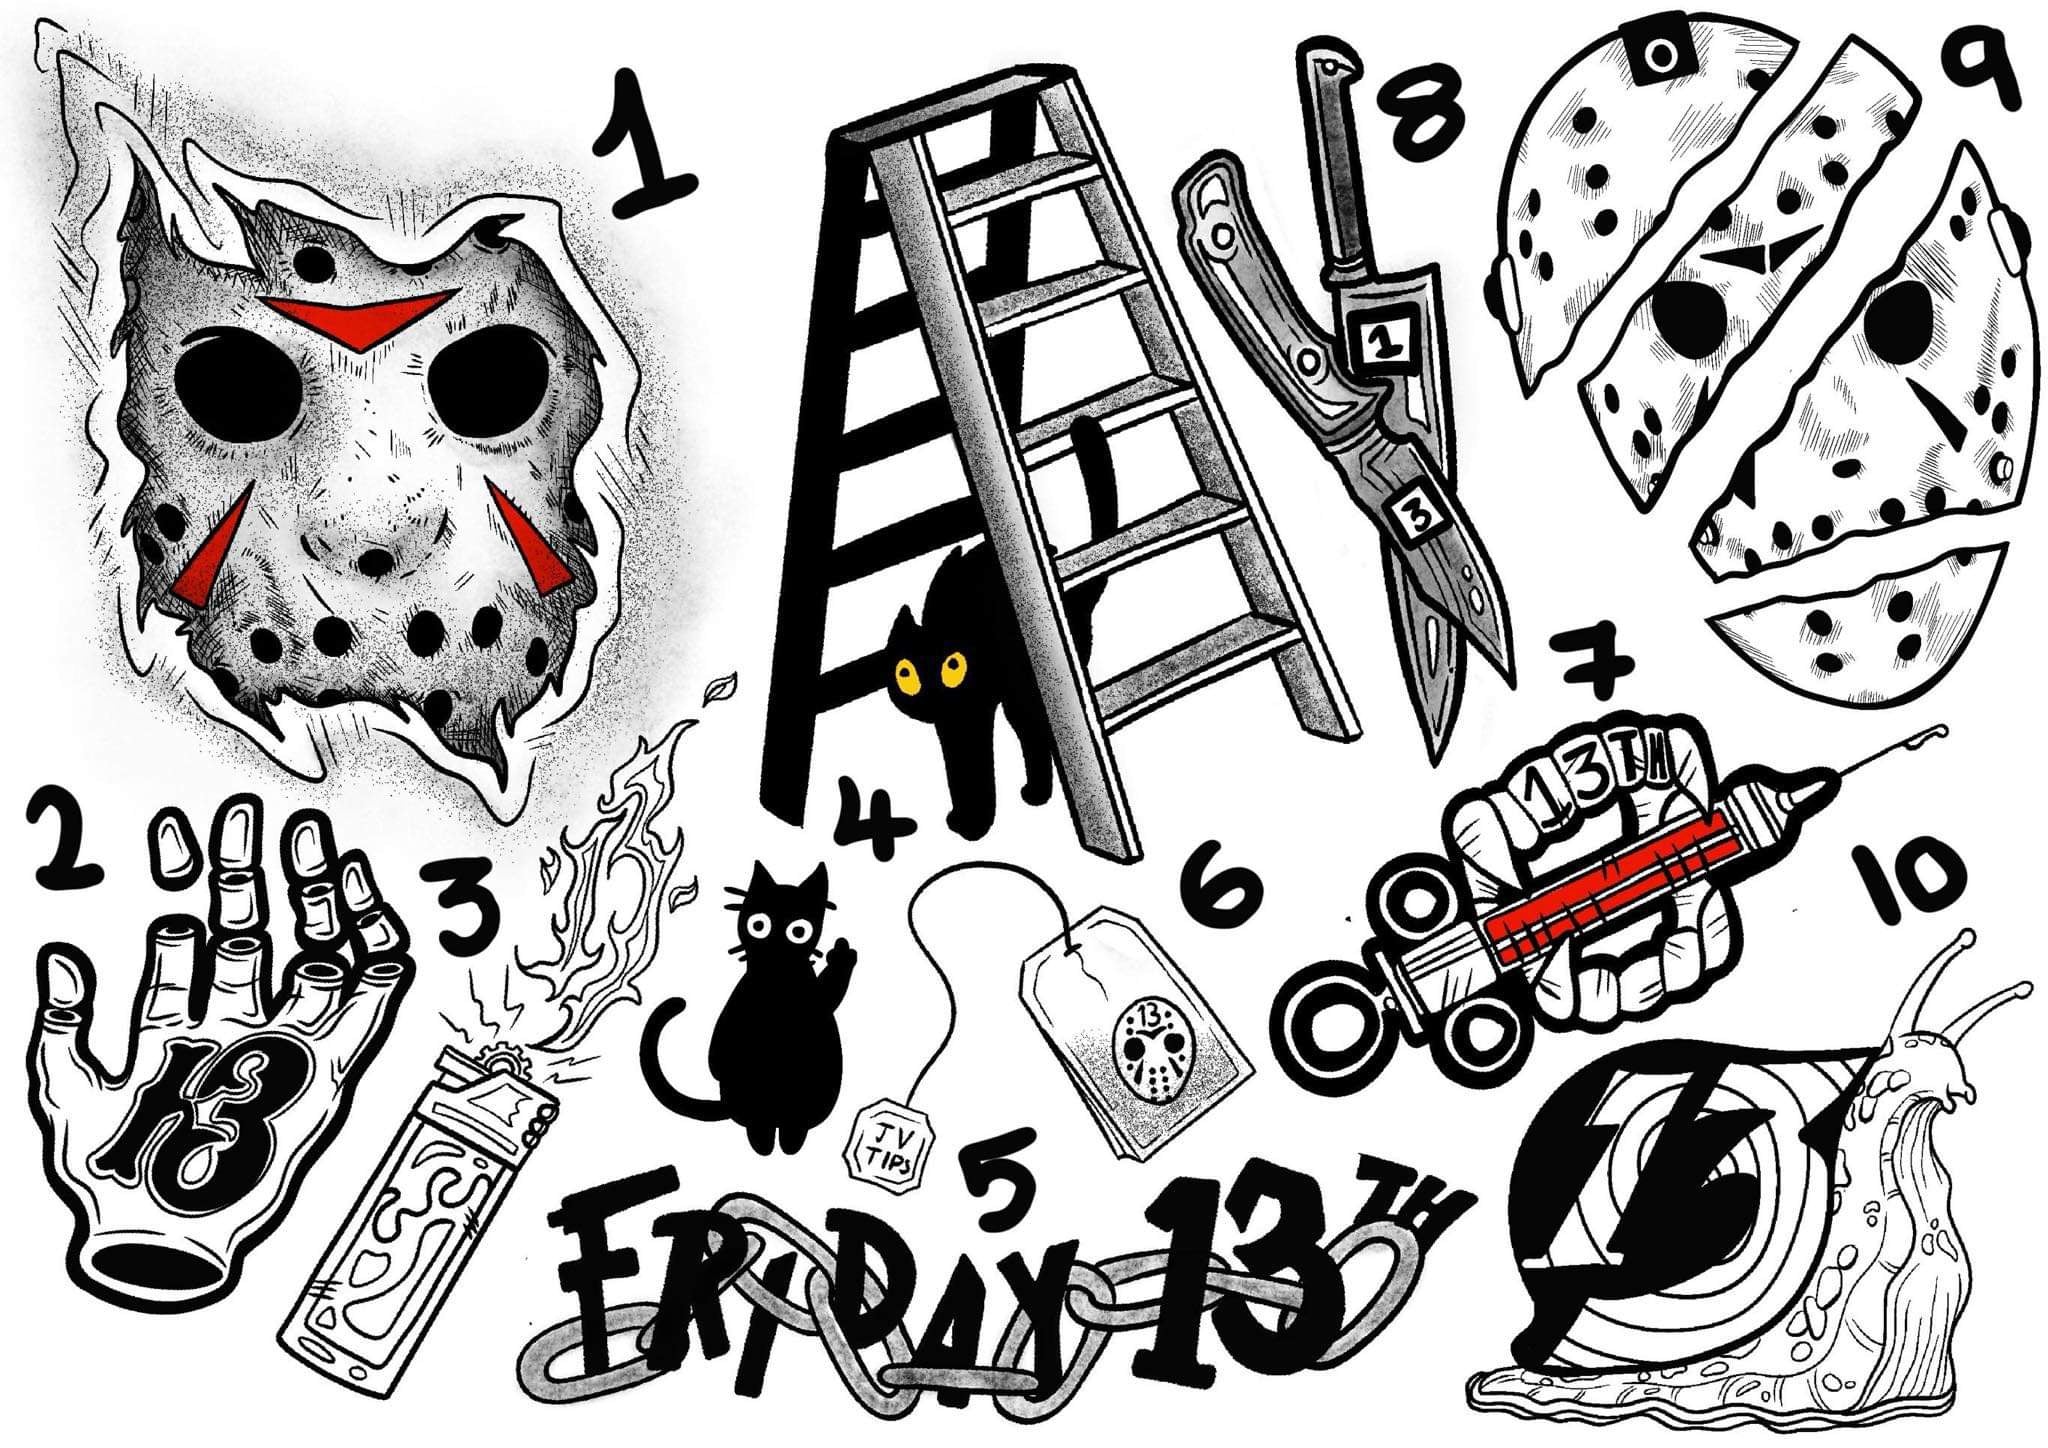 Friday 13th inspired designs by Emily